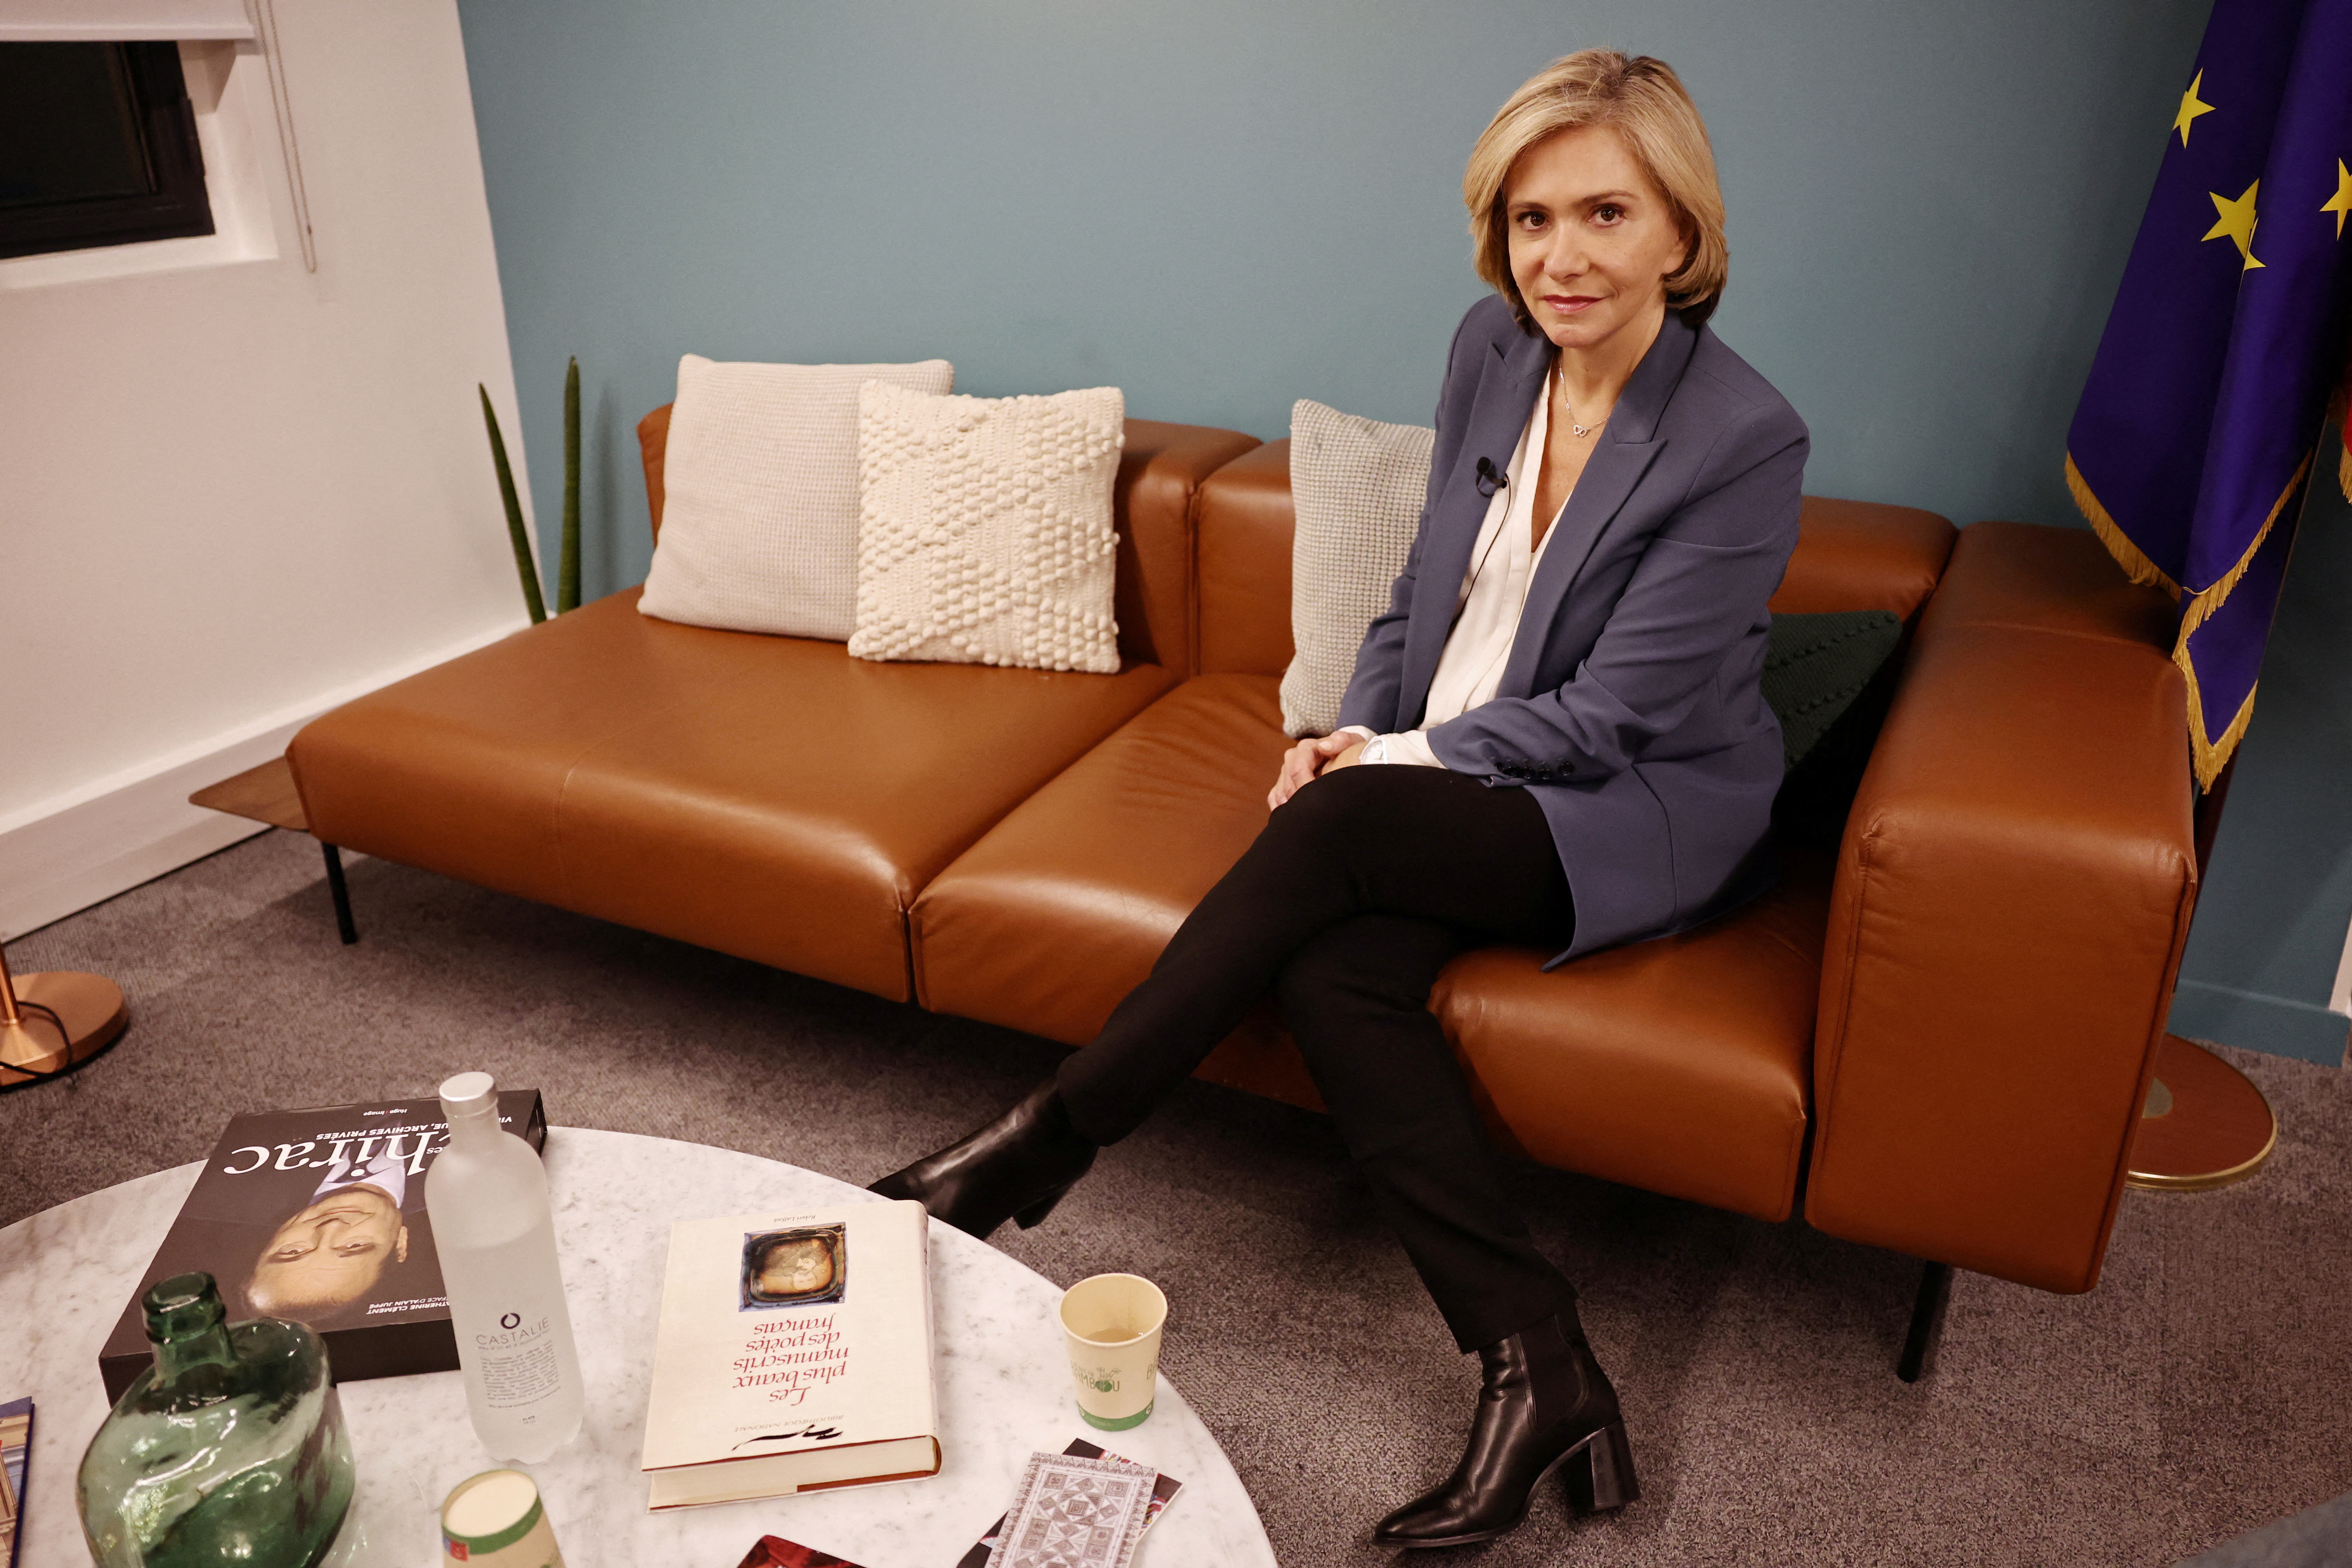 Interview with Valerie Pecresse, Les Republicains right-wing party candidate for the 2022 French presidential election, in Paris